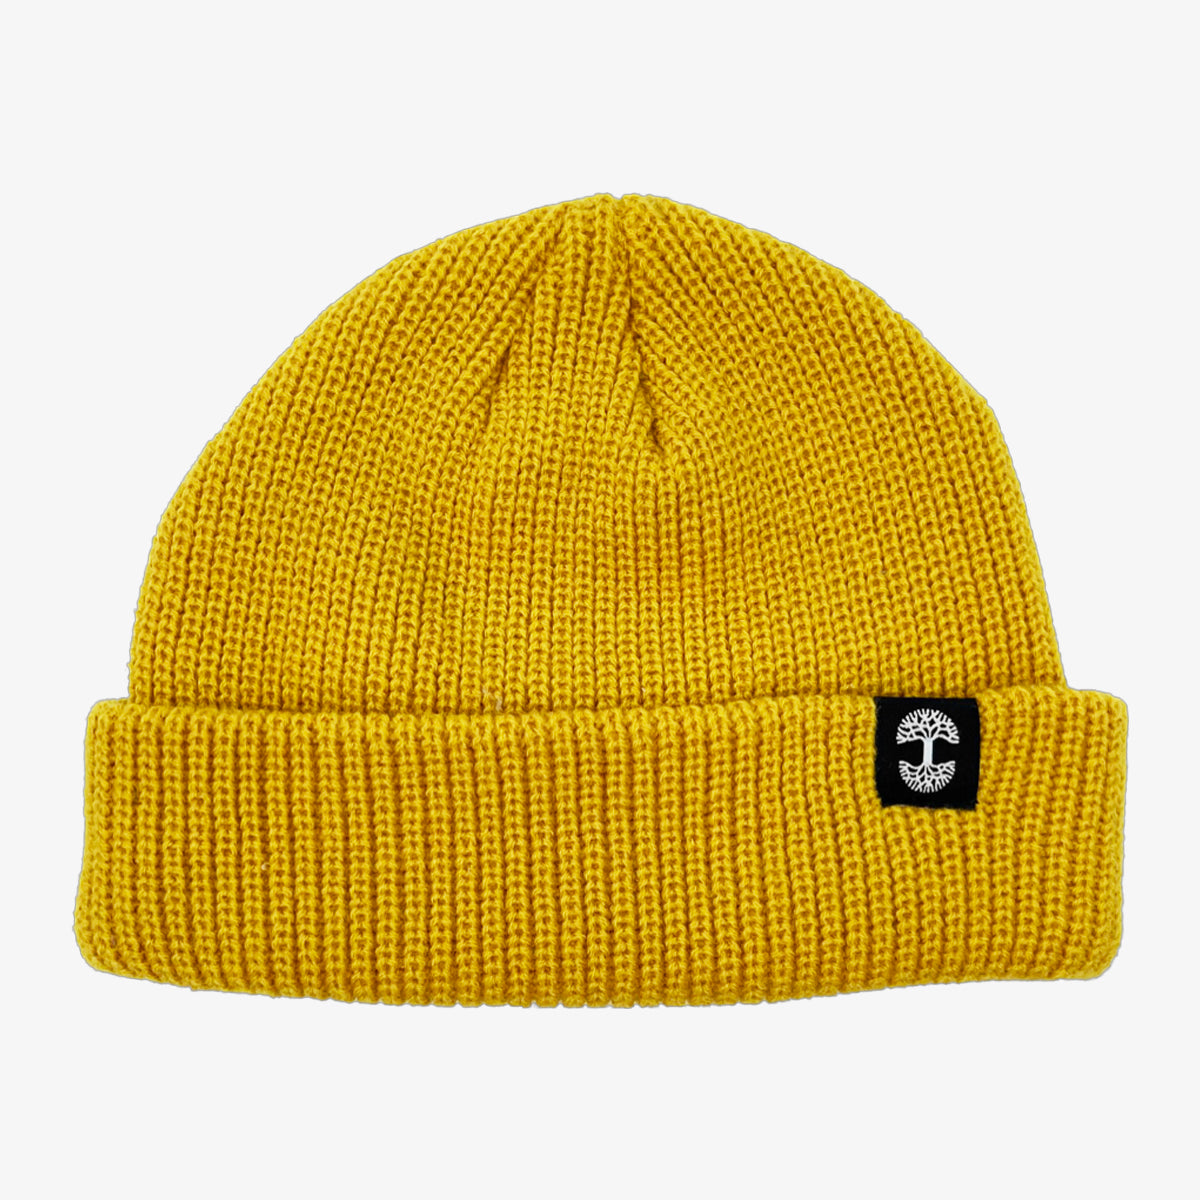 Shallow fit mustard yellow cuffed beanie with black and white Oaklandish tree logo tag on the left wear side. 